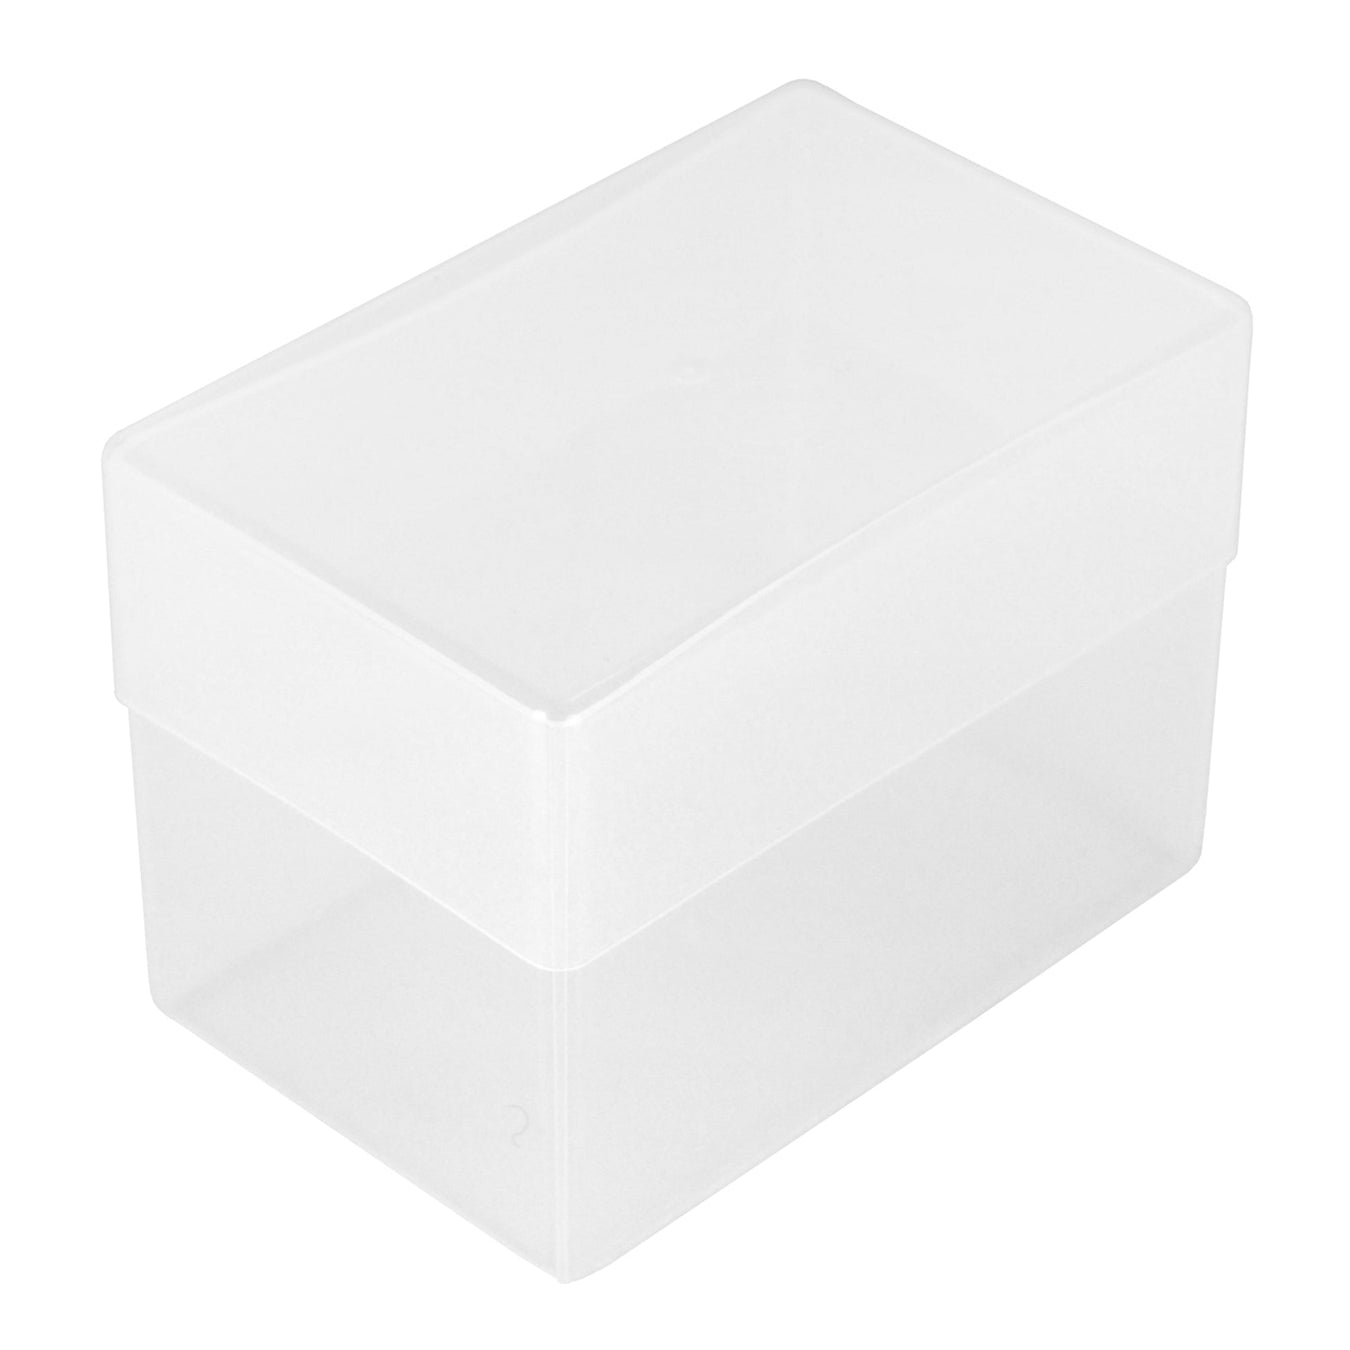 70mm deep clear plastic business card box with lid